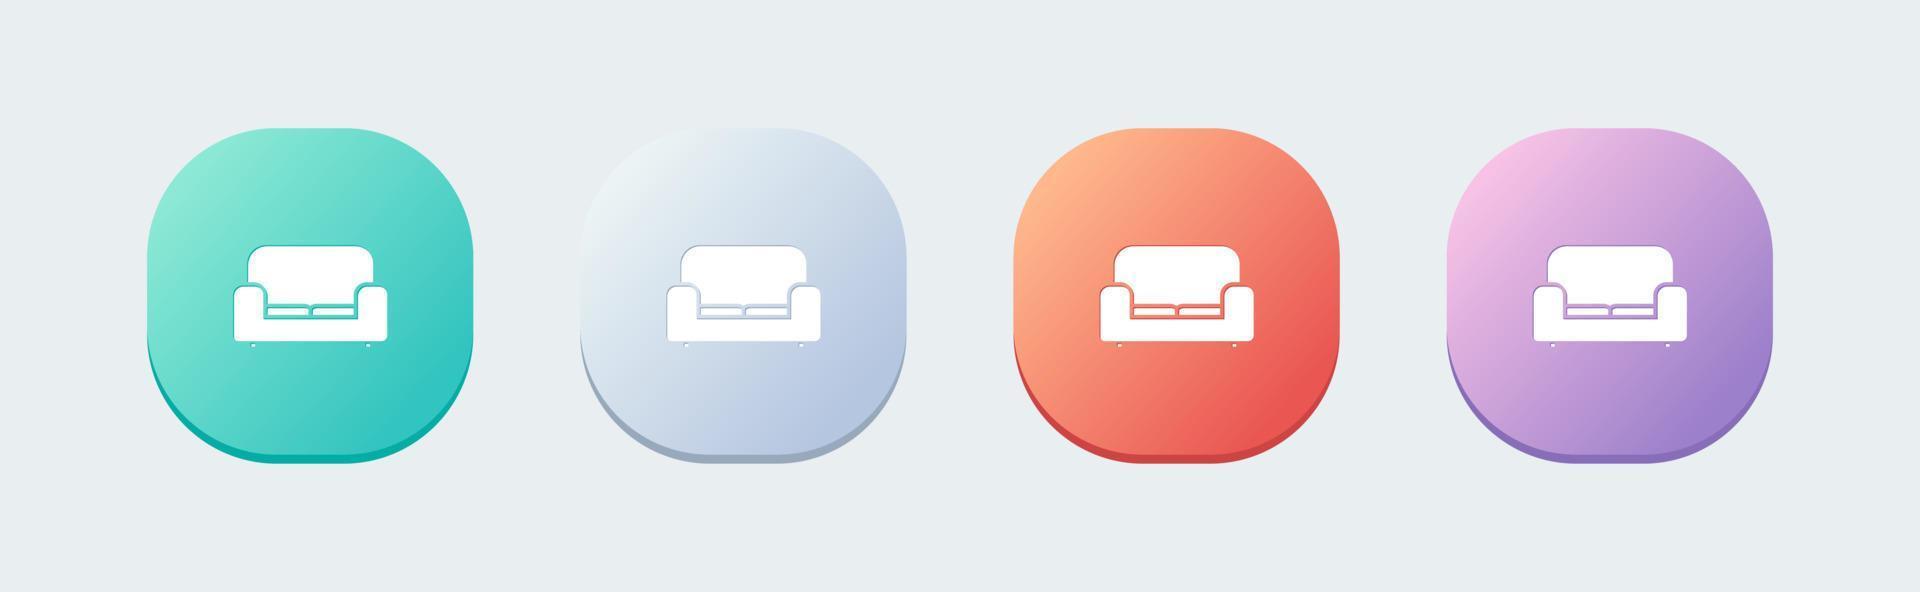 Couch solid icon in flat design style. Sofa signs vector illustration.